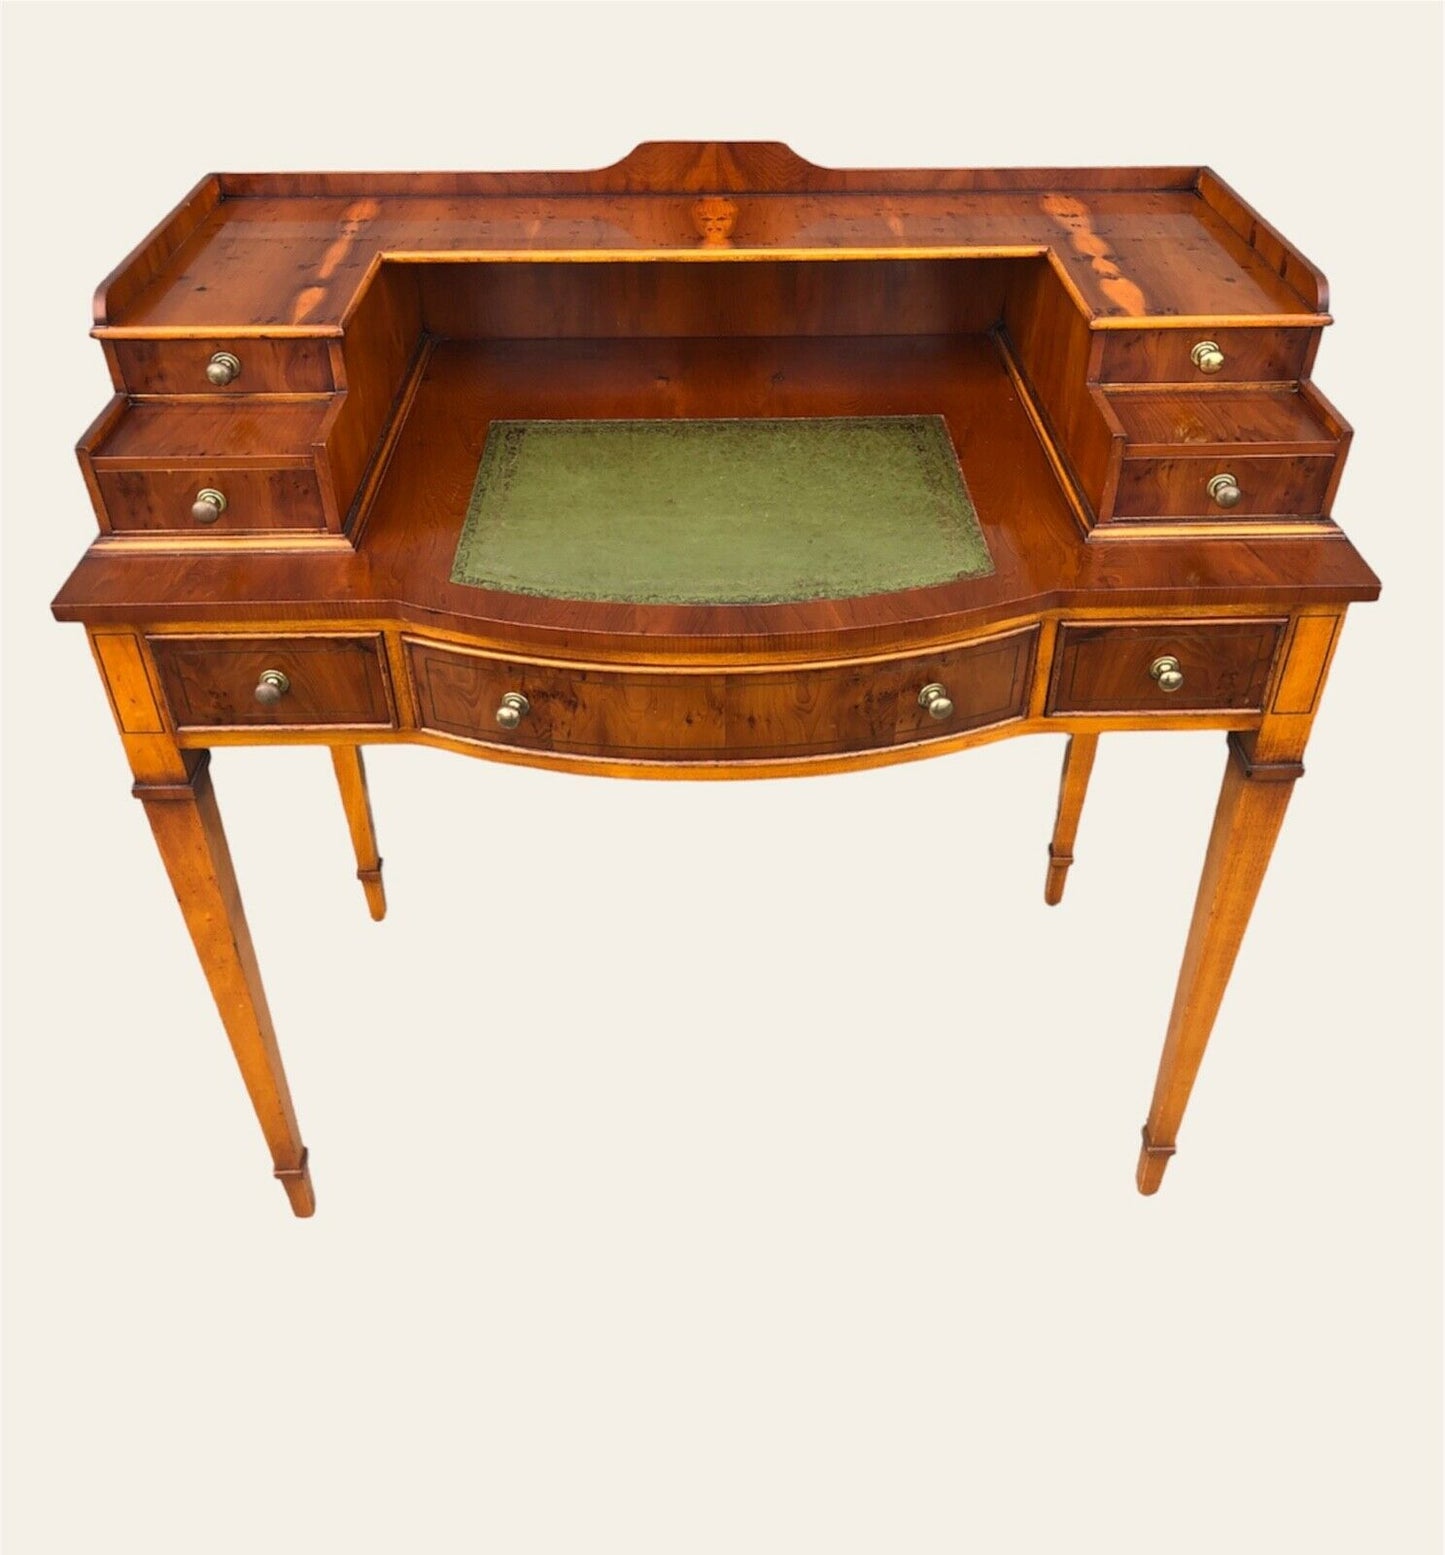 000954....Handsome Vintage Yew Wood Writing Desk ( sold )